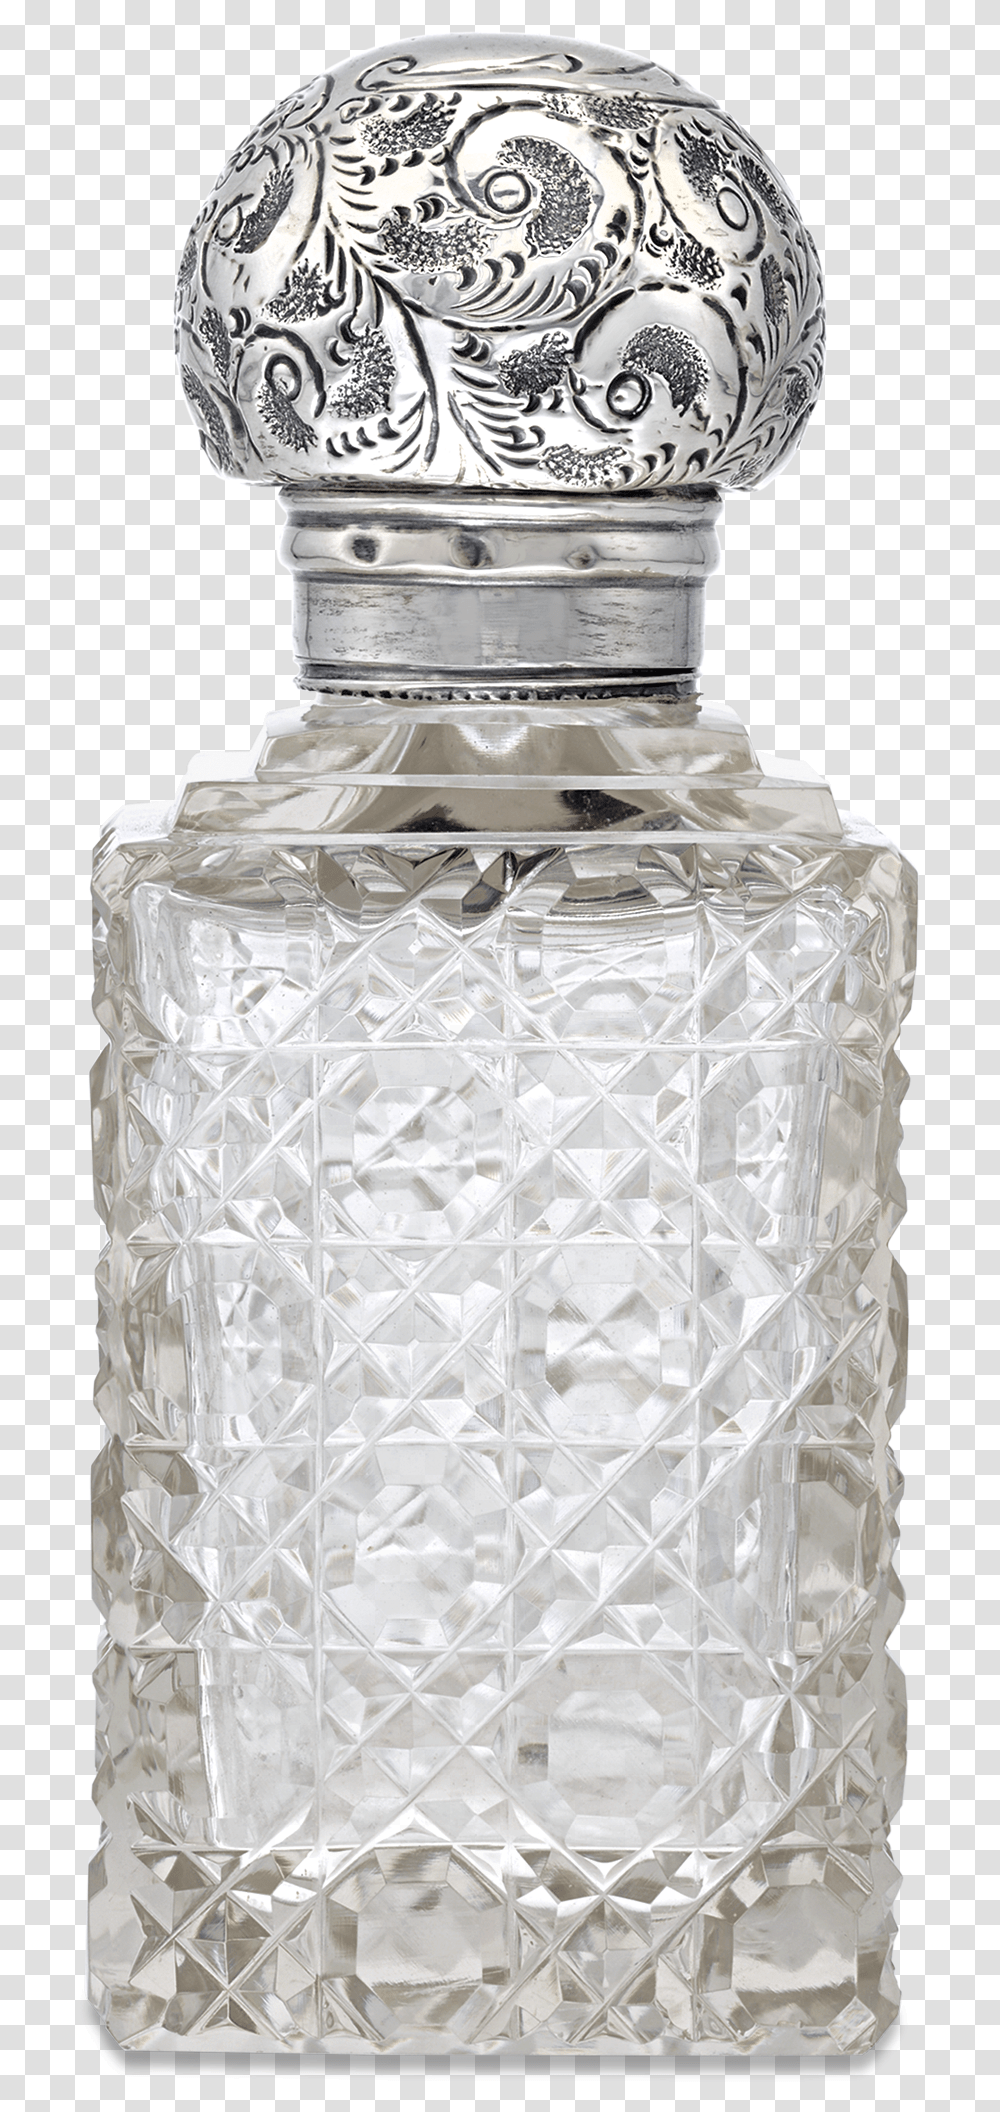 Square Cut Glass And Silver Perfume Flacon, Wedding Cake, Dessert, Food, Jar Transparent Png